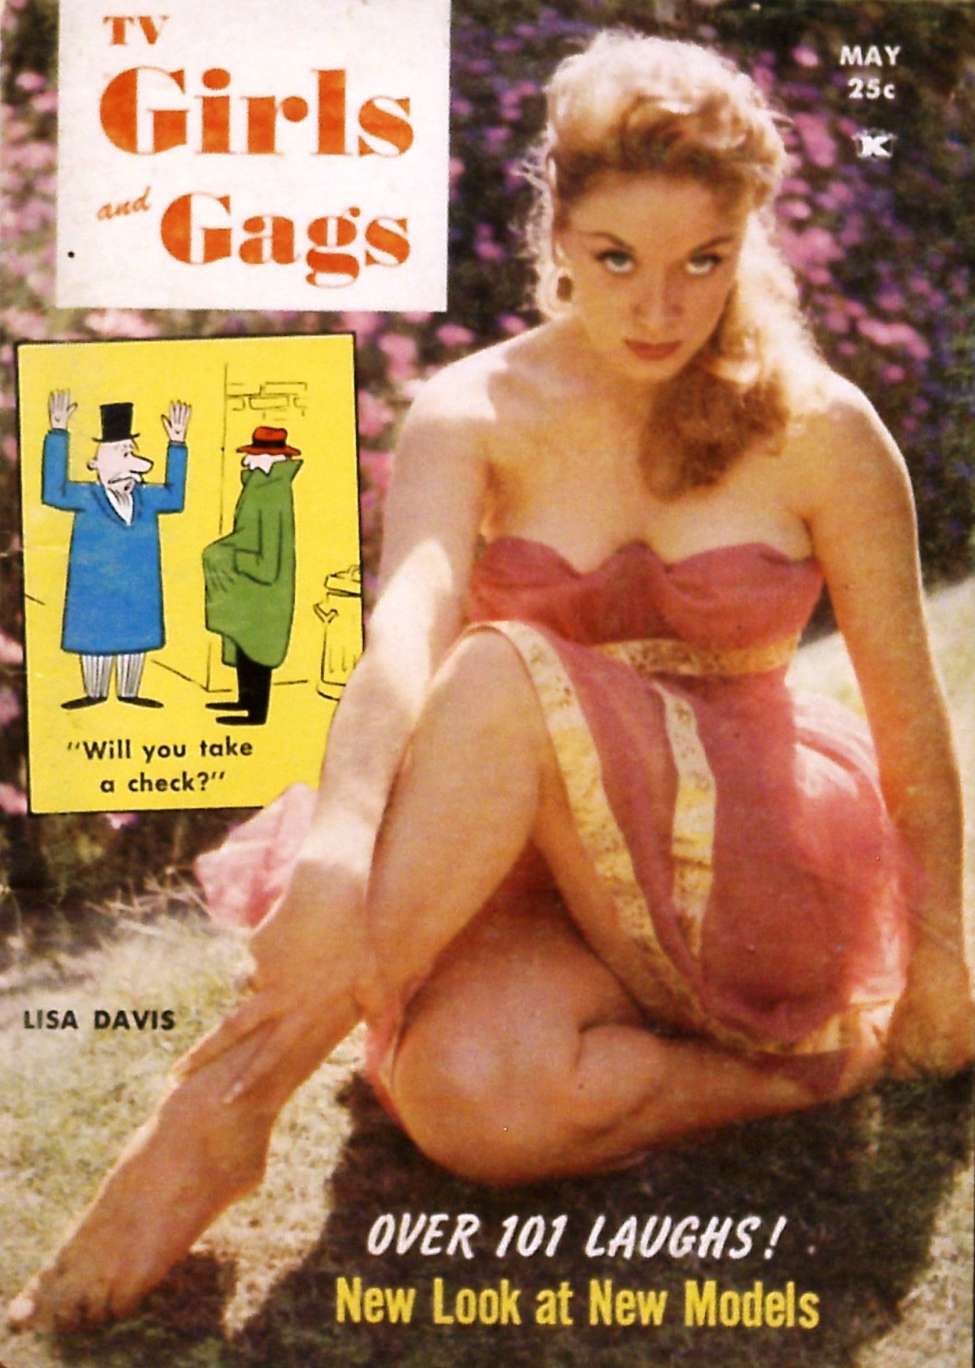 Book Cover For TV Girls and Gags v6 3